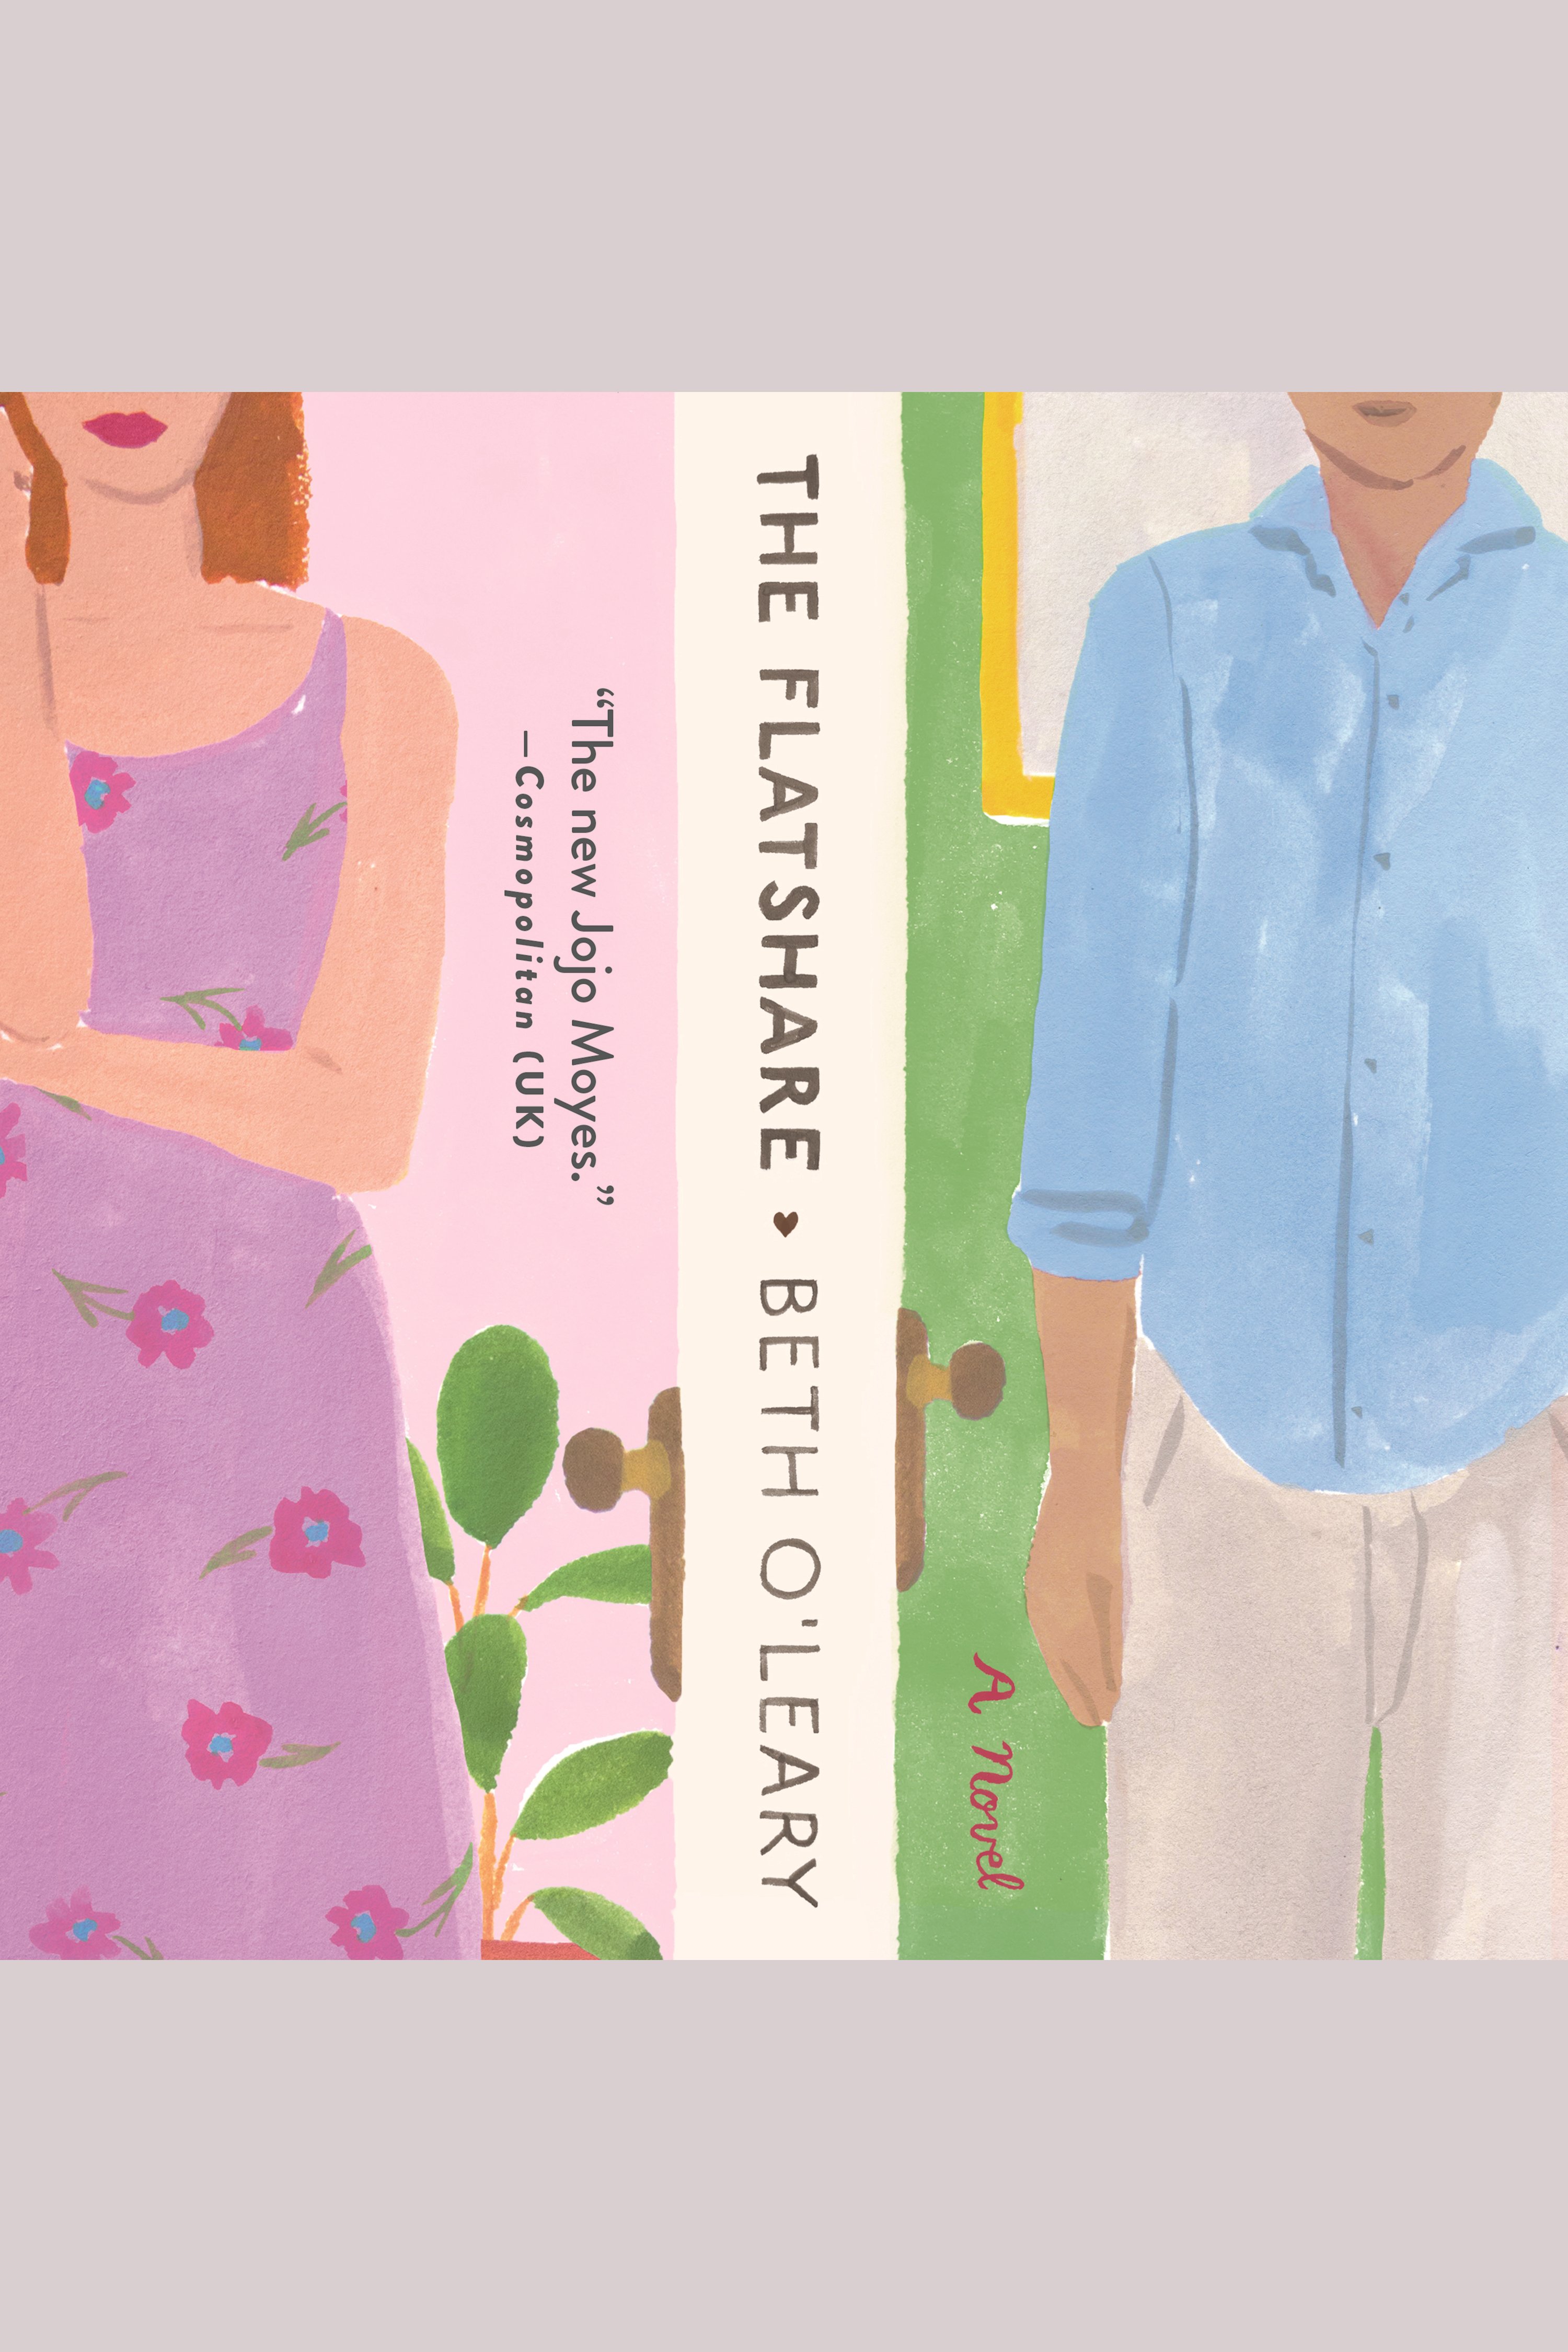 The flatshare cover image